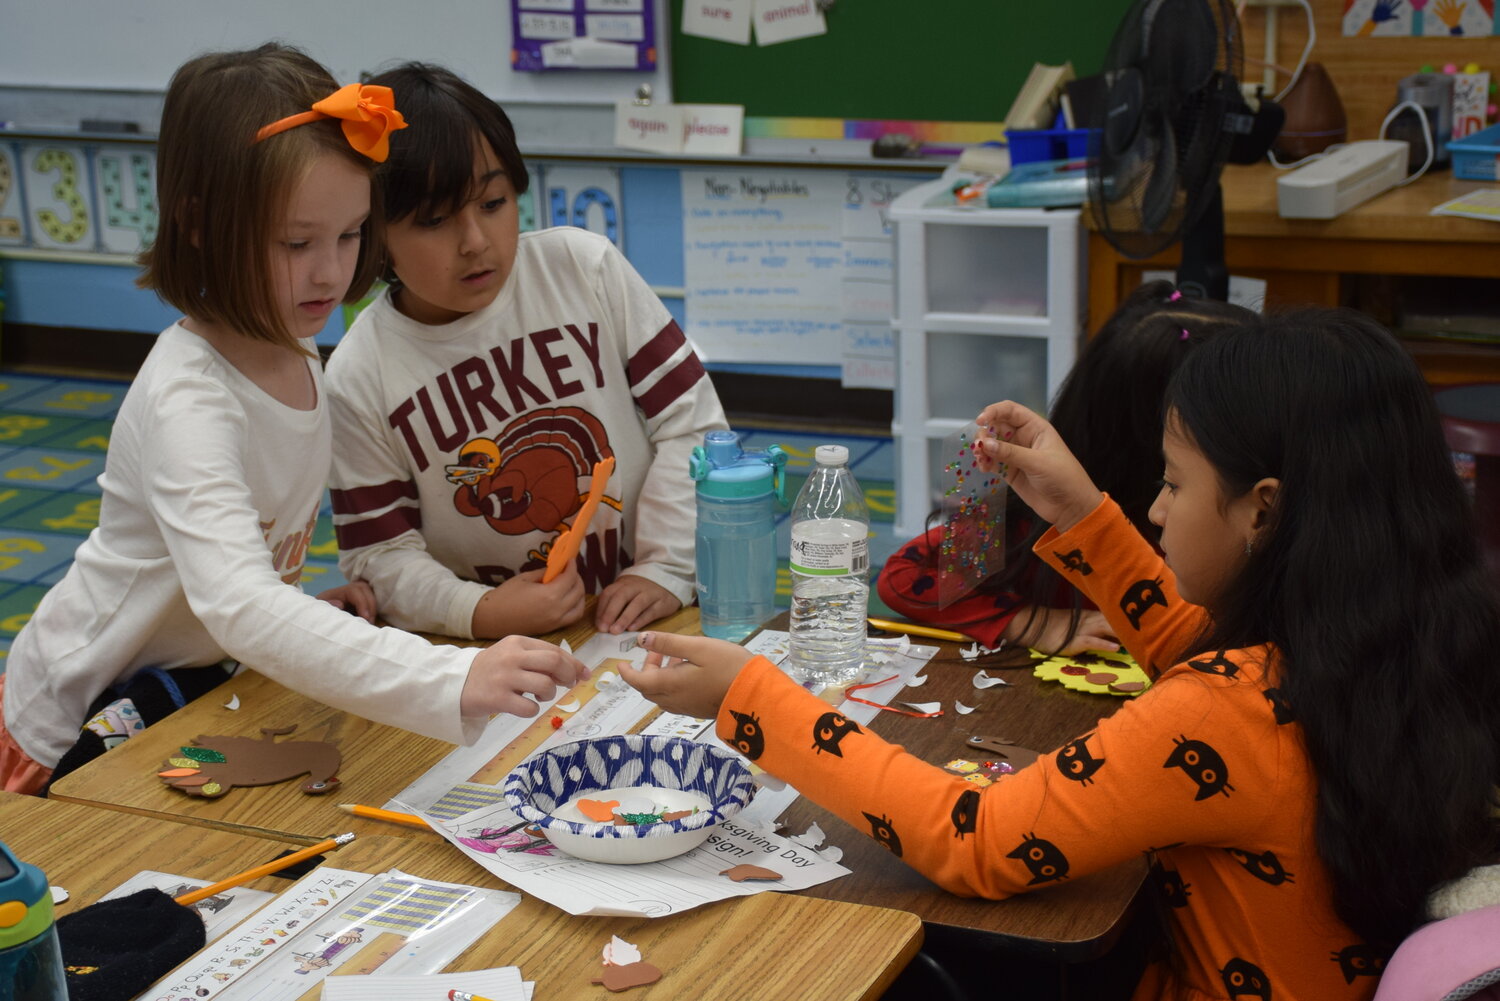 Students wore adorable festive outfits as they worked together to make Thanksgiving crafts.